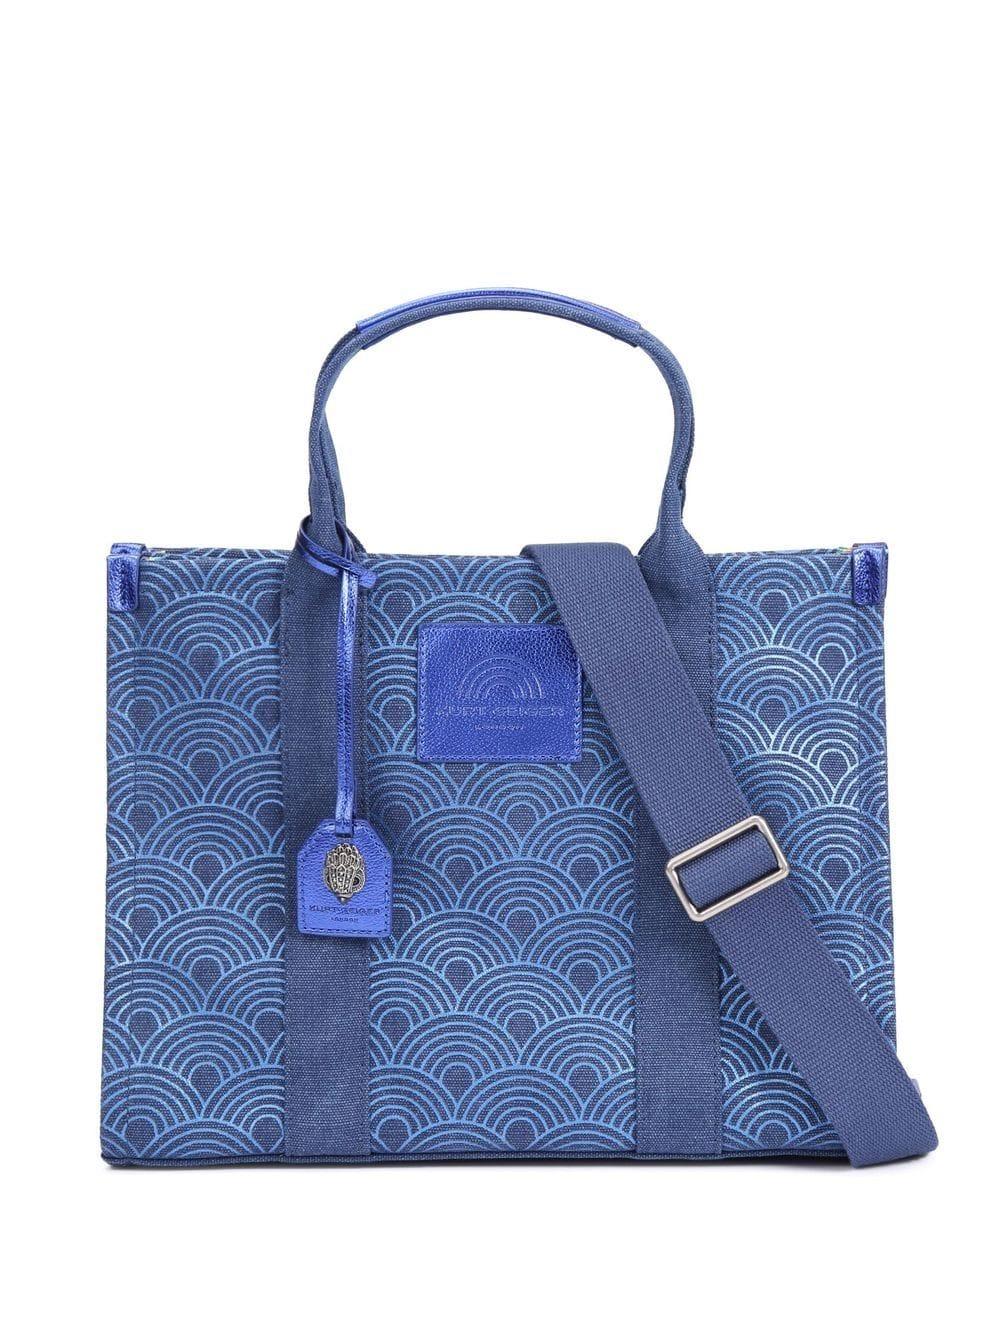 Kurt Geiger Small Southbank Tote Bag in Blue | Lyst